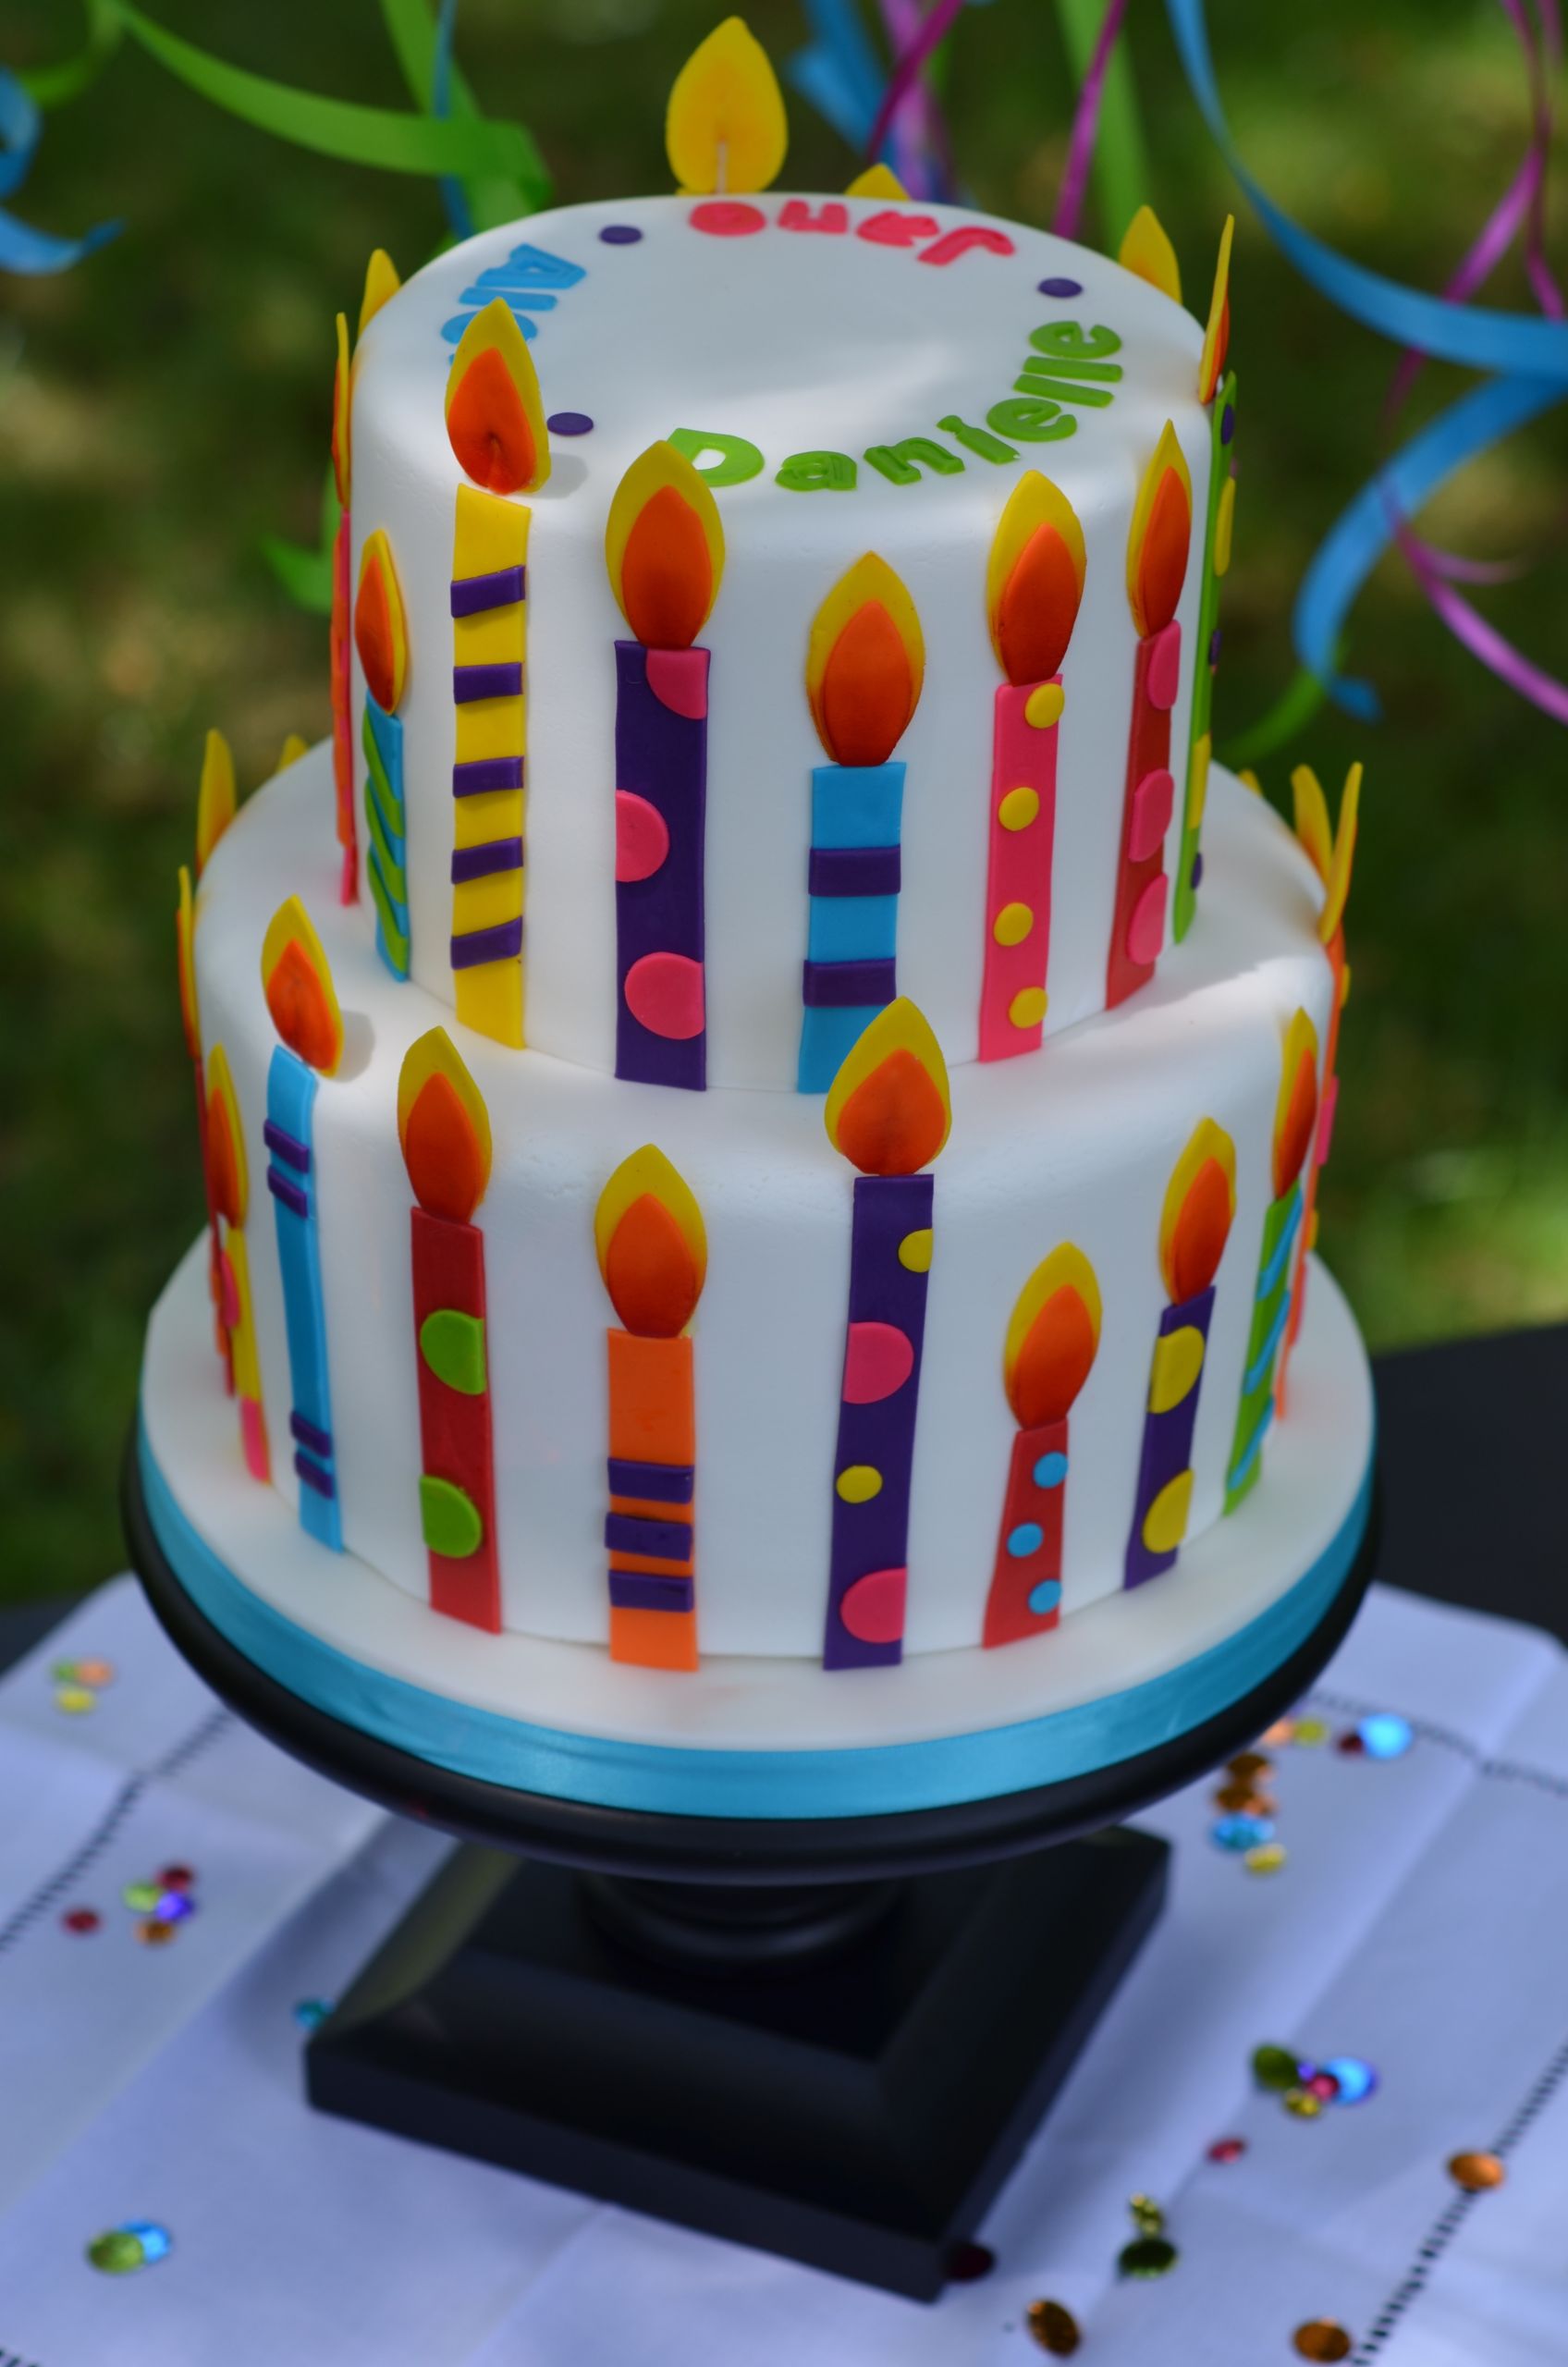 Top 15 Most Shared Birthday Cake Candles